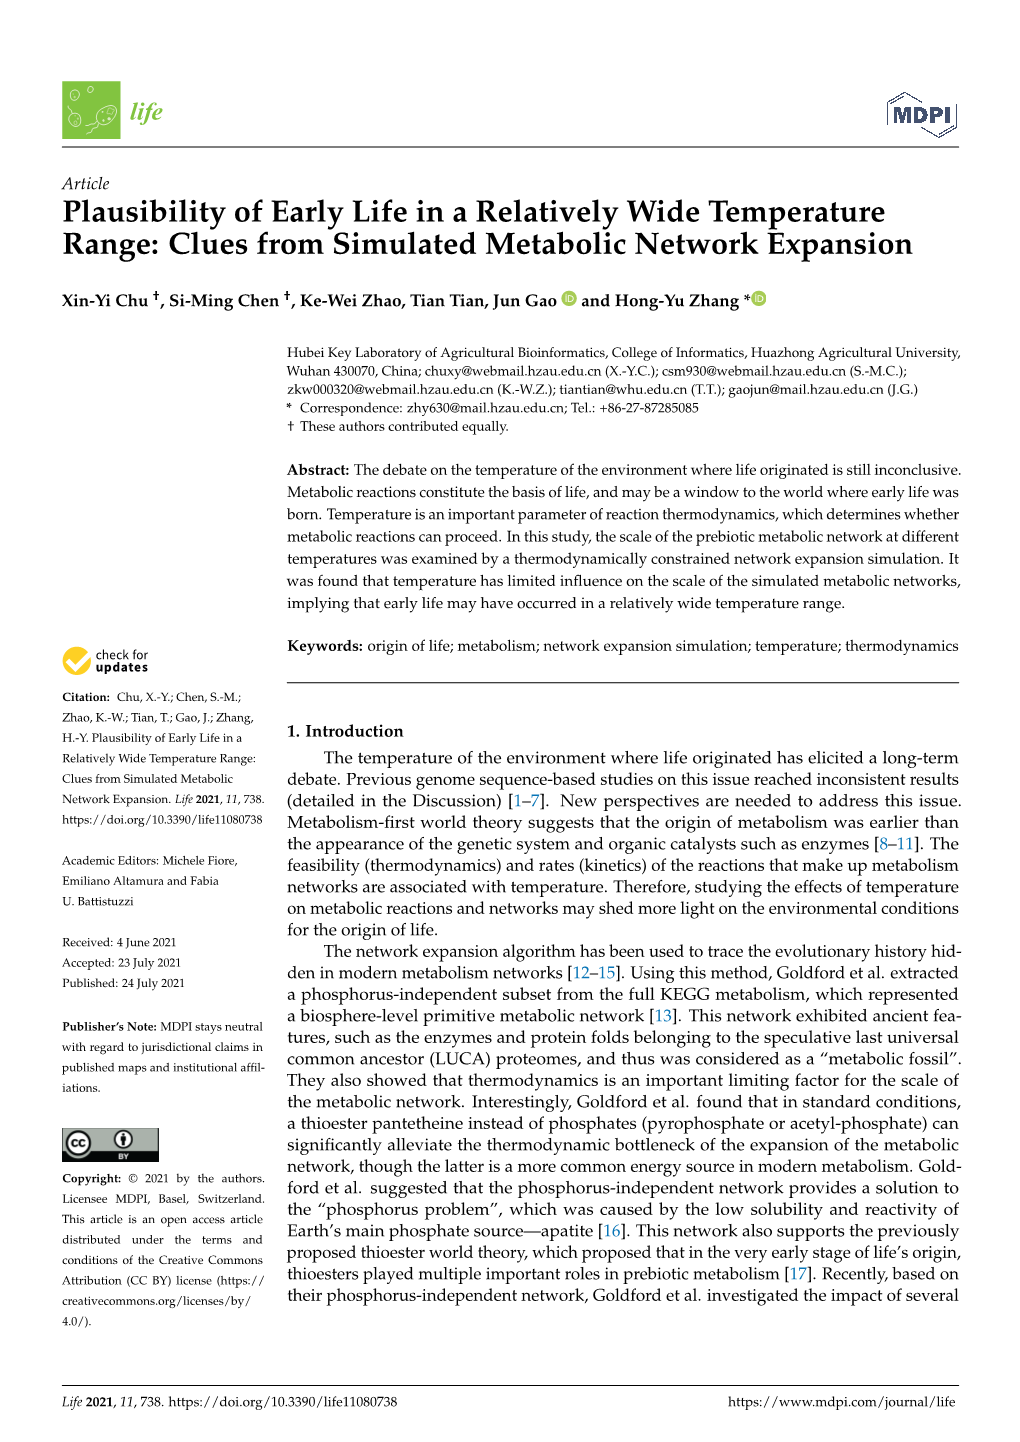 Clues from Simulated Metabolic Network Expansion